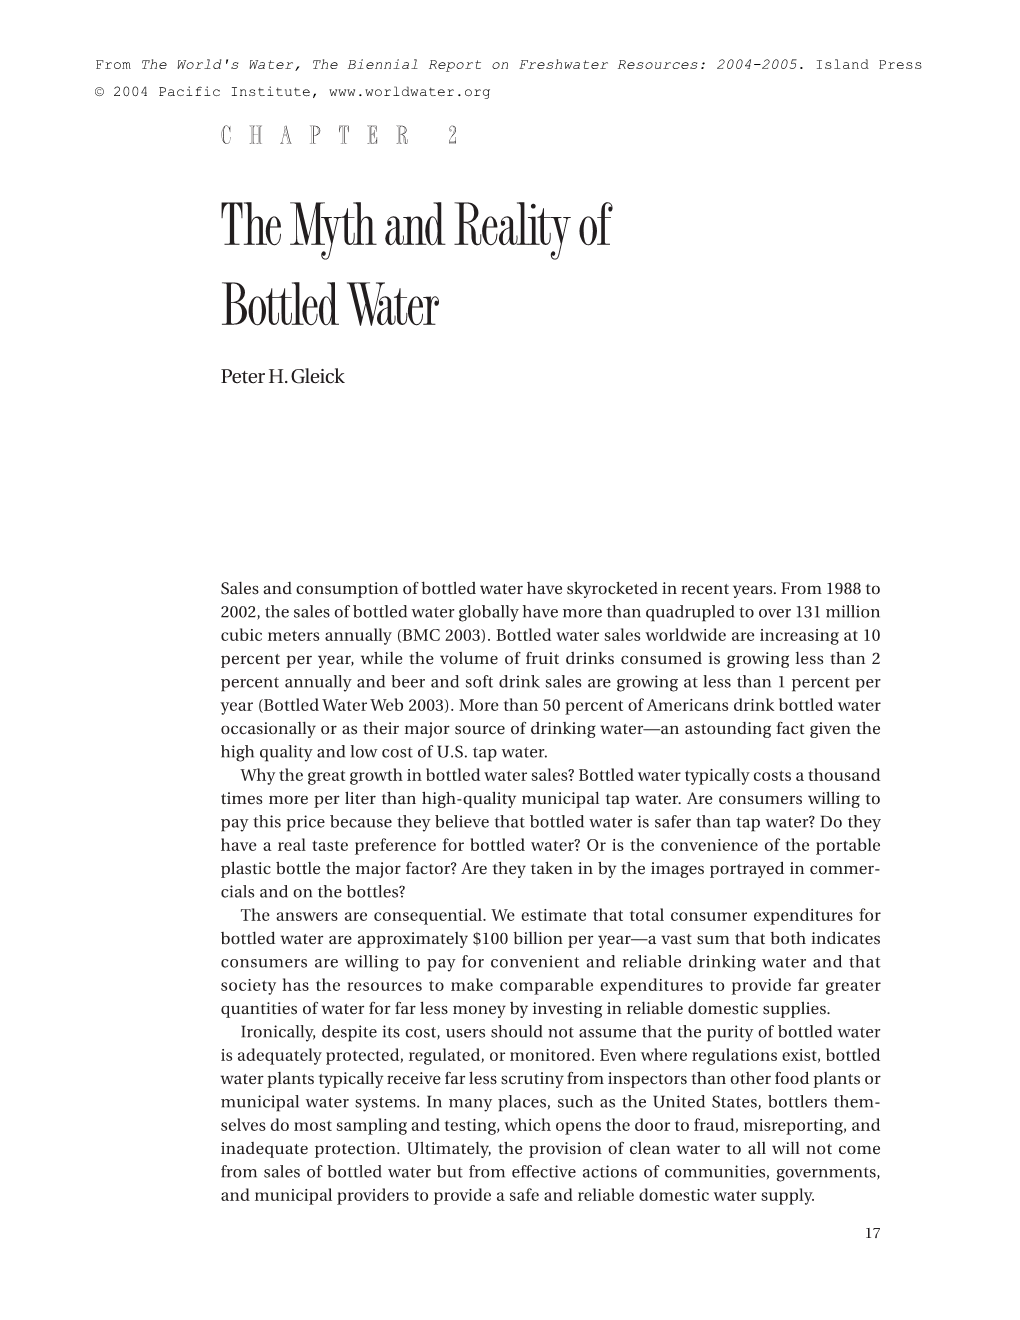 CHAPTER 2 Themythandrealityof Bottled Water